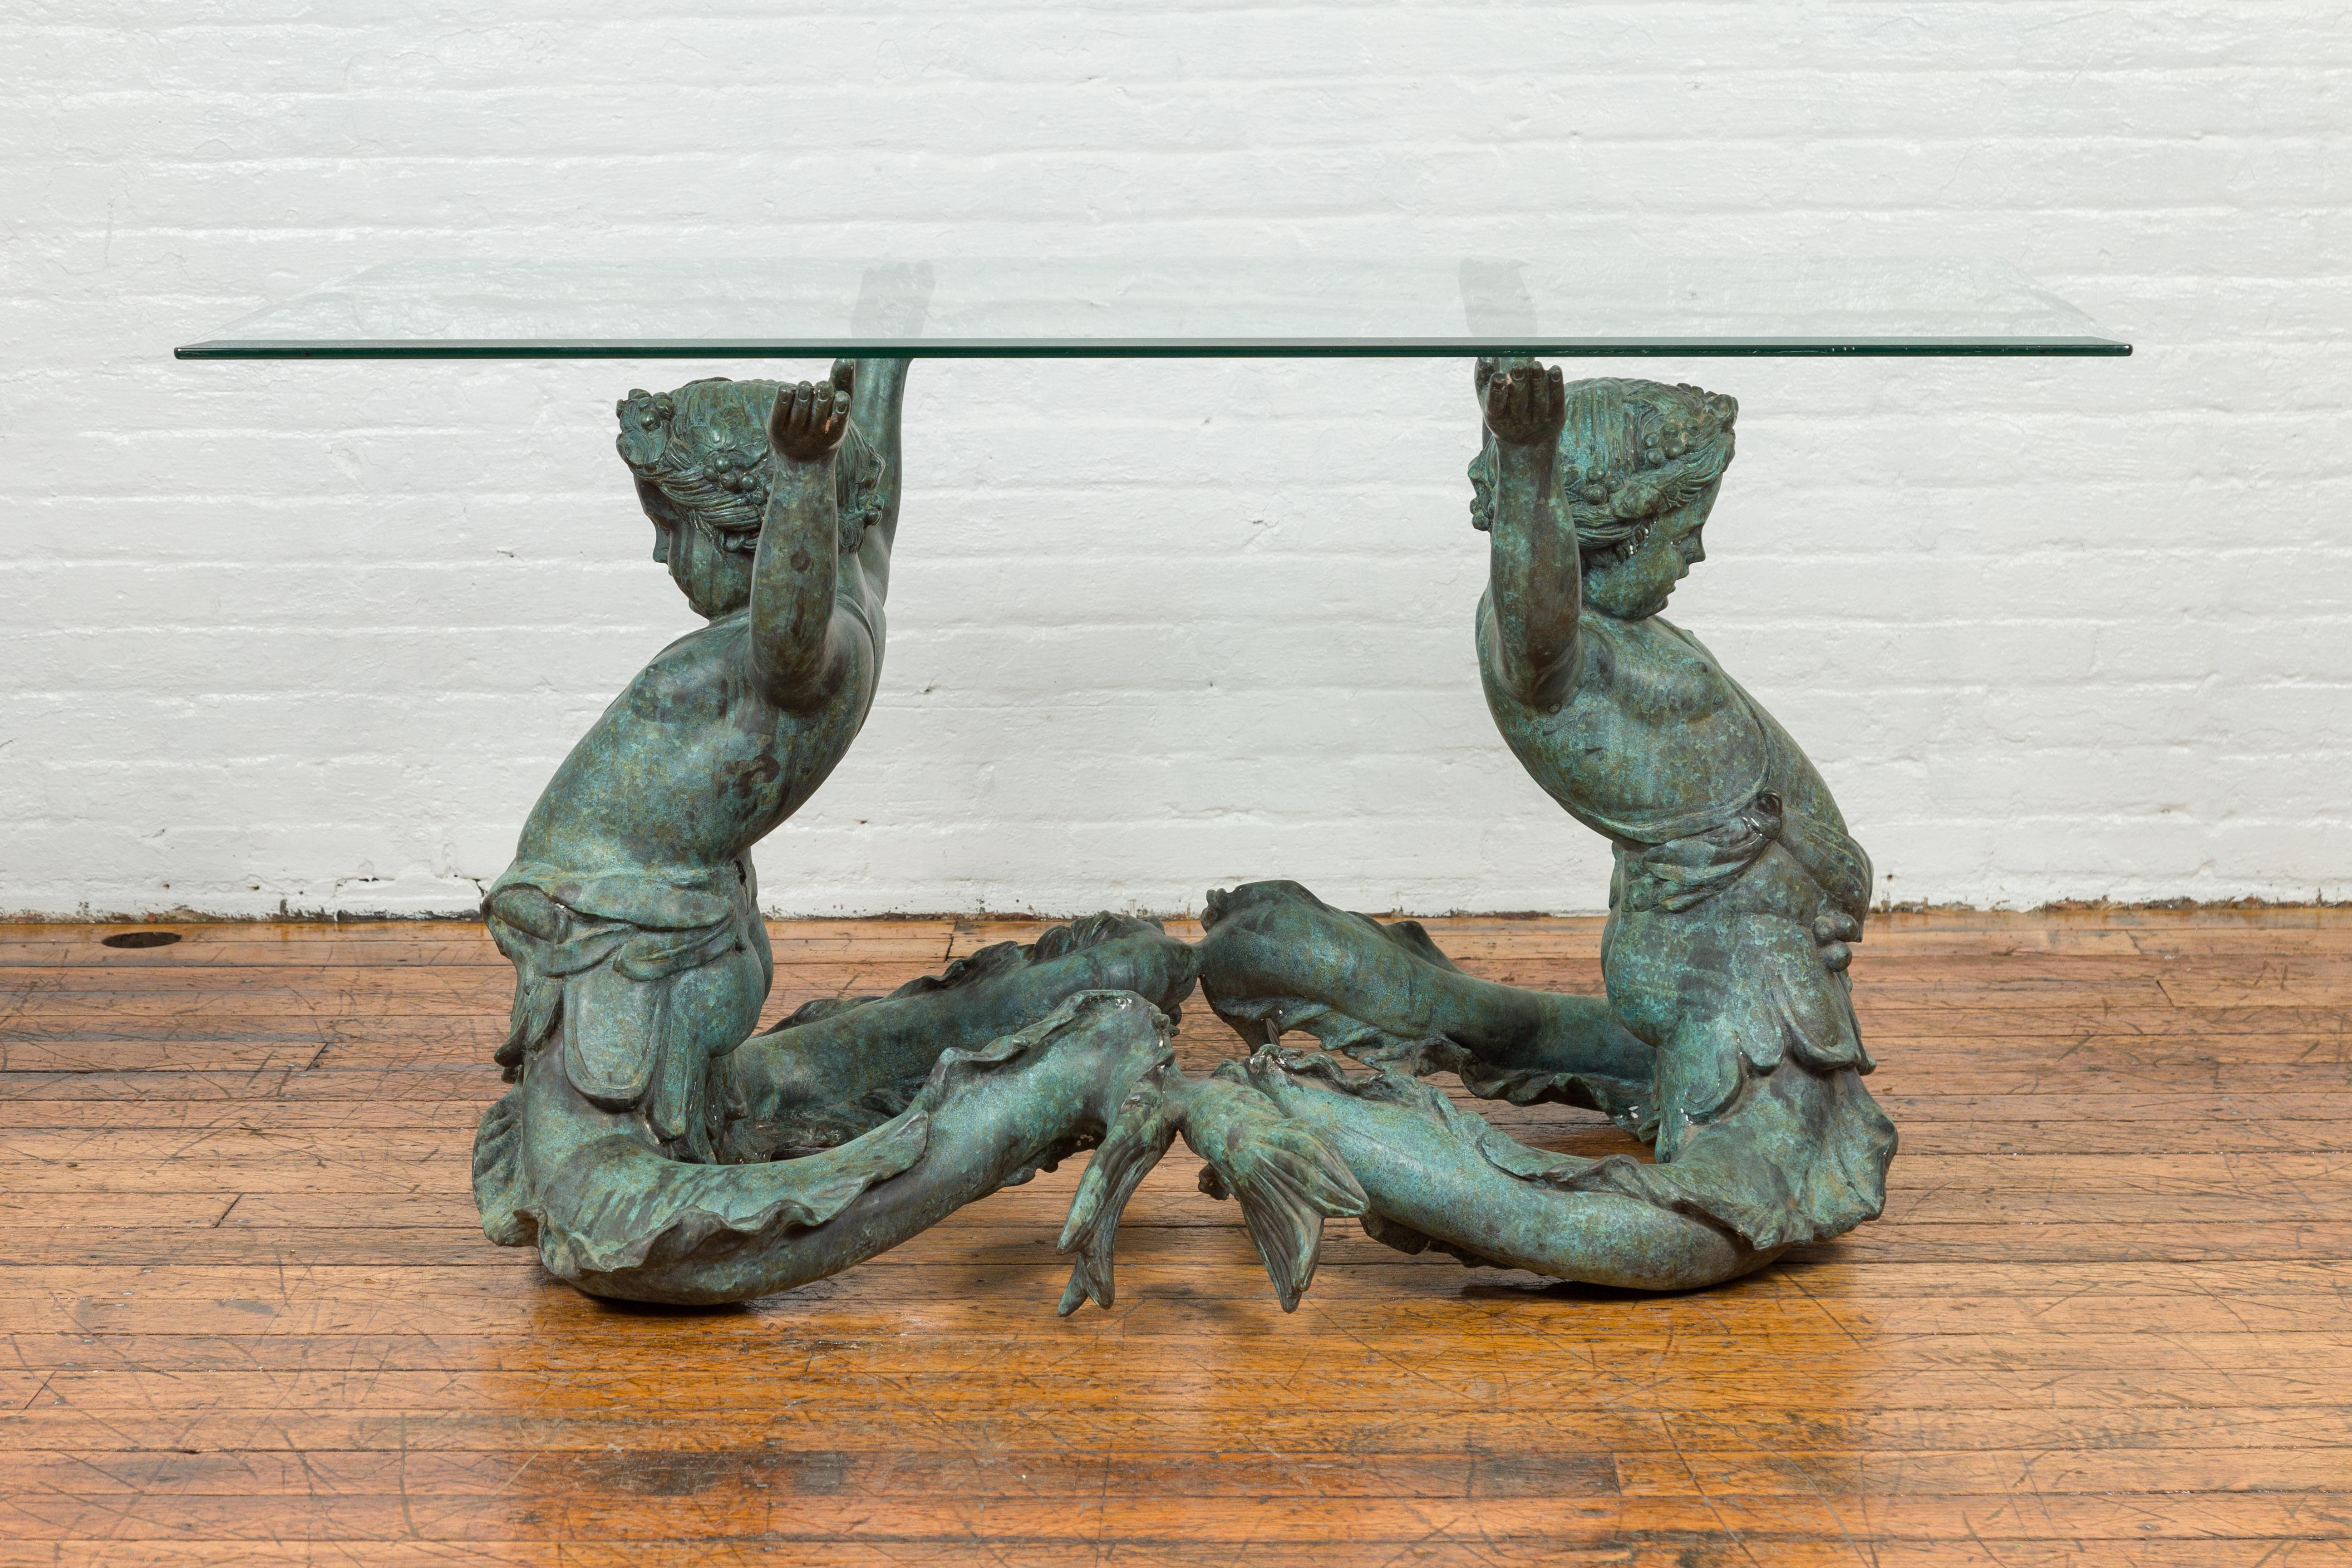 A Greco Roman style contemporary bronze double triton dining room table base, glass top not included. (The top is included to help evoke the possibilities). Created with the traditional technique of the lost-wax (à la cire perdue) that allows a